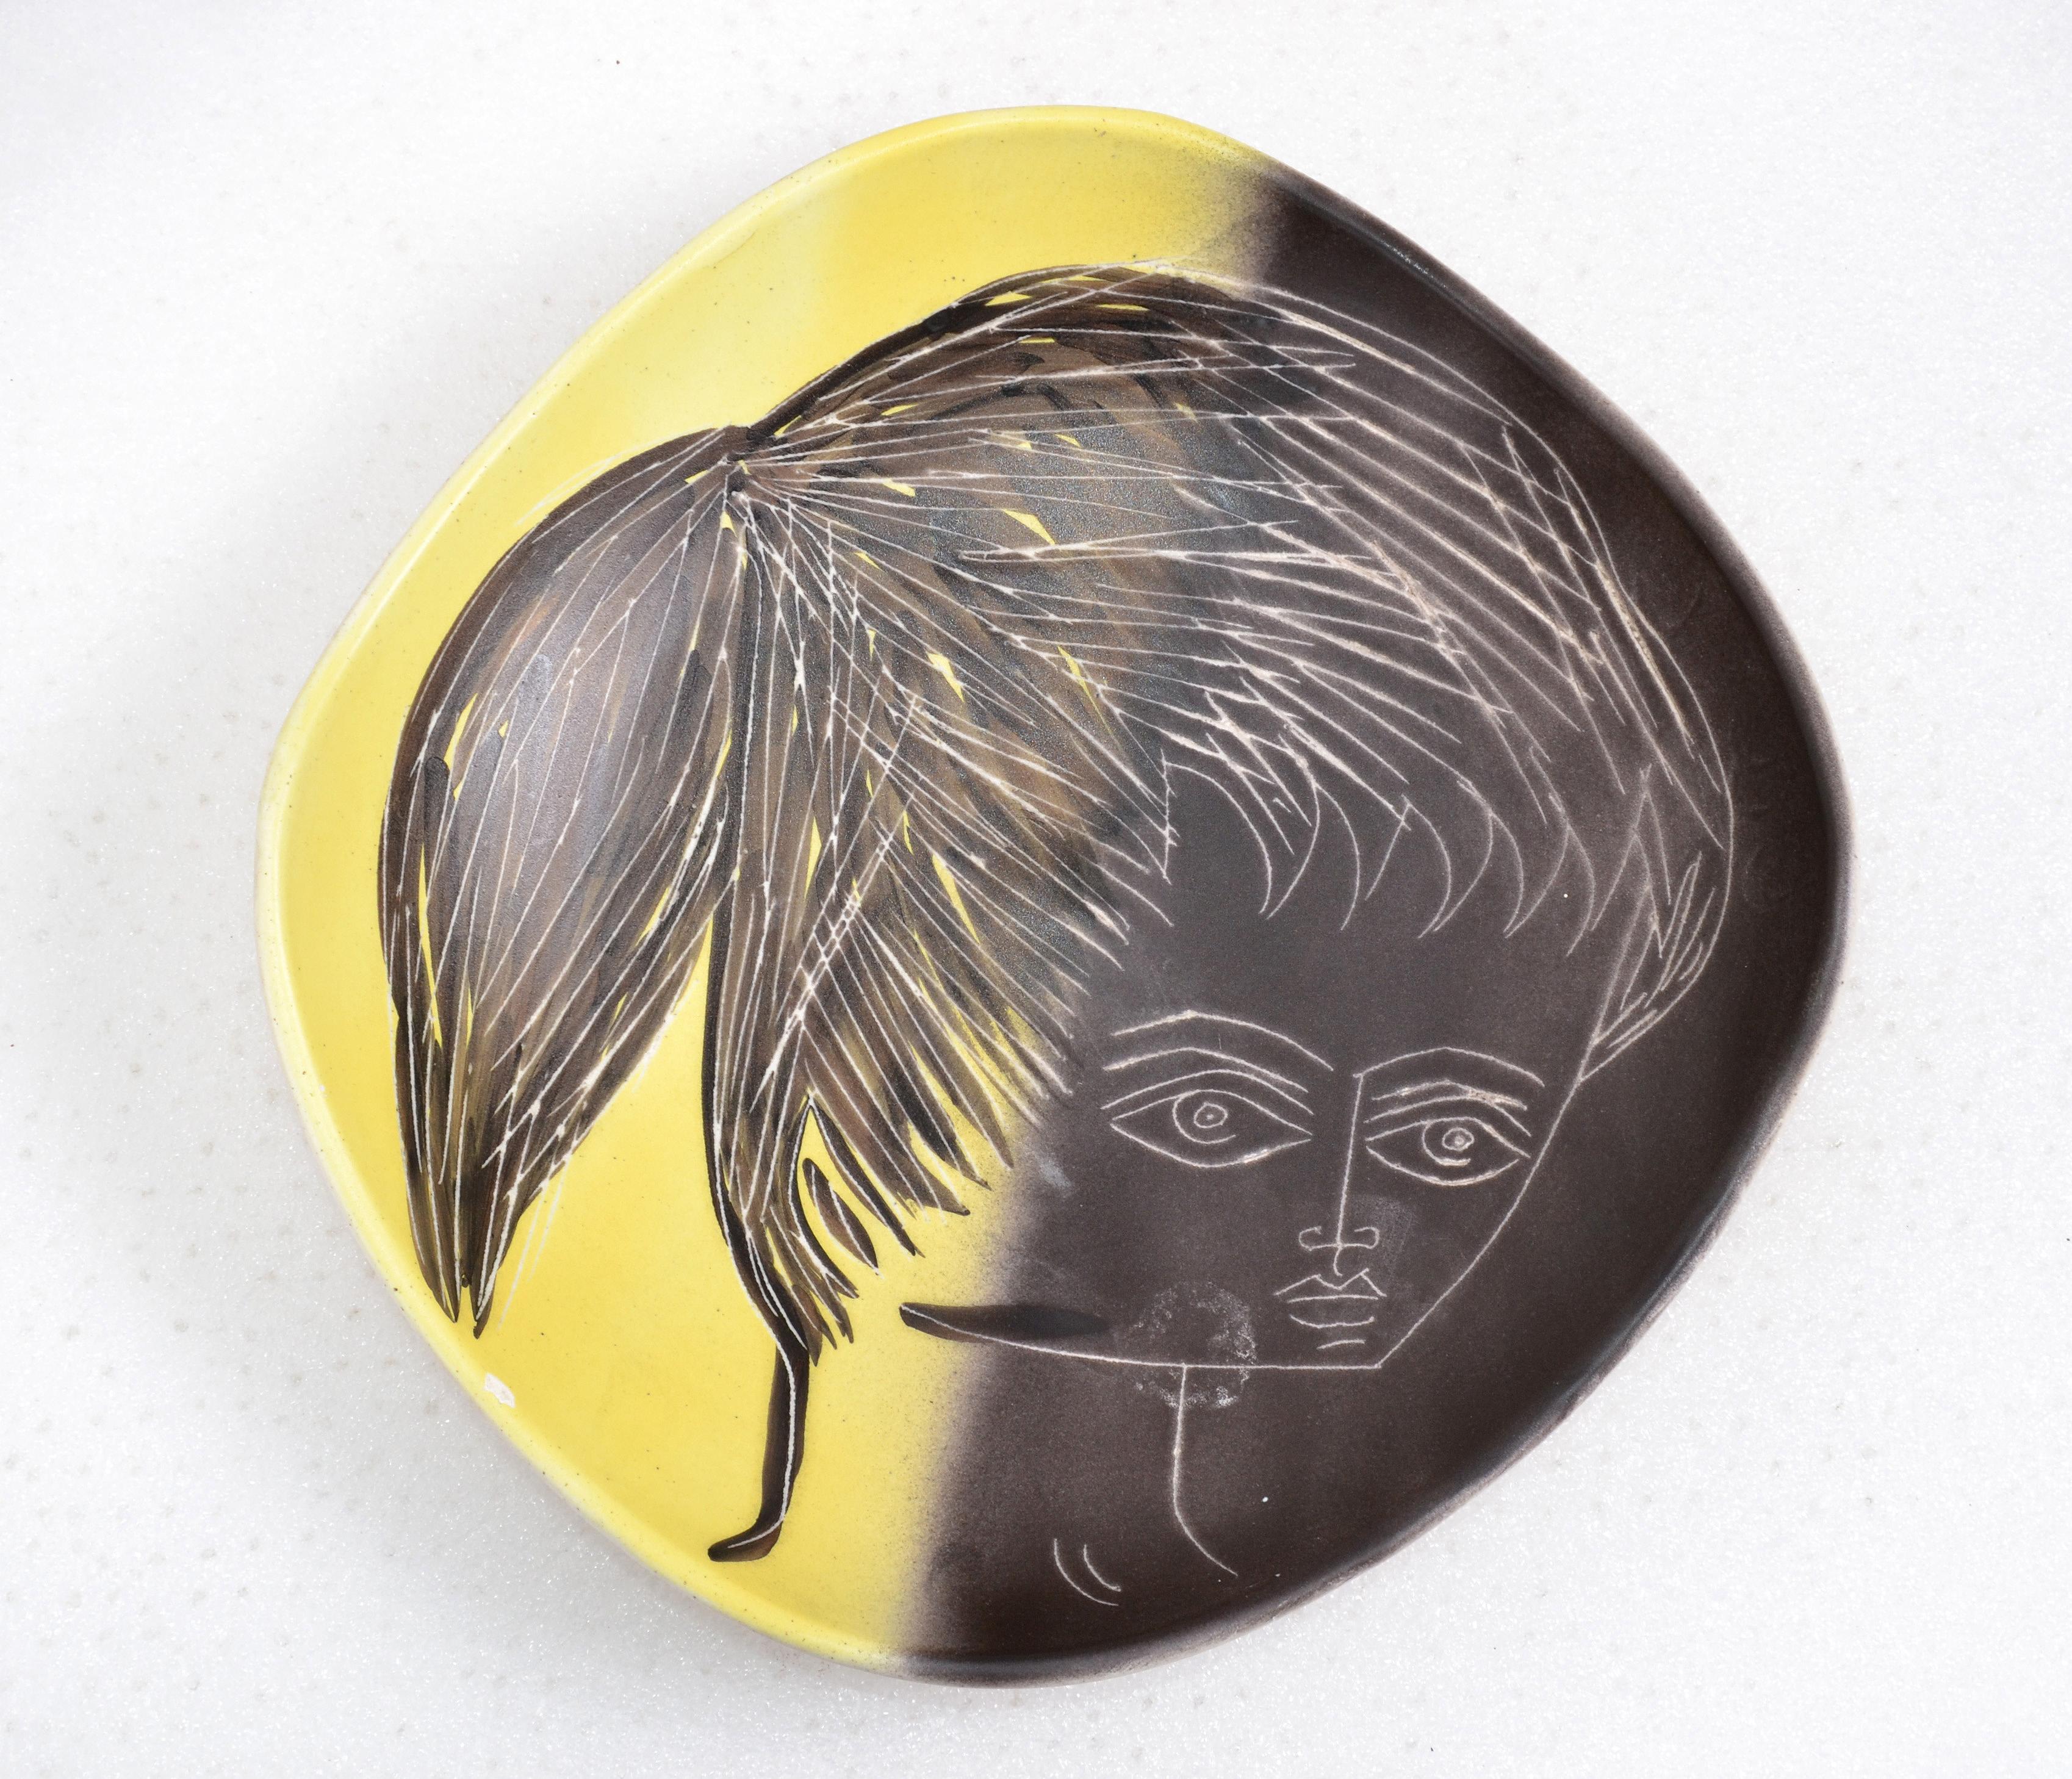 1955 Mid-Century Modern handcrafted ceramic centerpiece, plate designed by Artist M. Barbier depicting a face, from Vallauris, France.
Superb color contrast in yellow, black and beige.
Signed by artist and marked at the base.
  